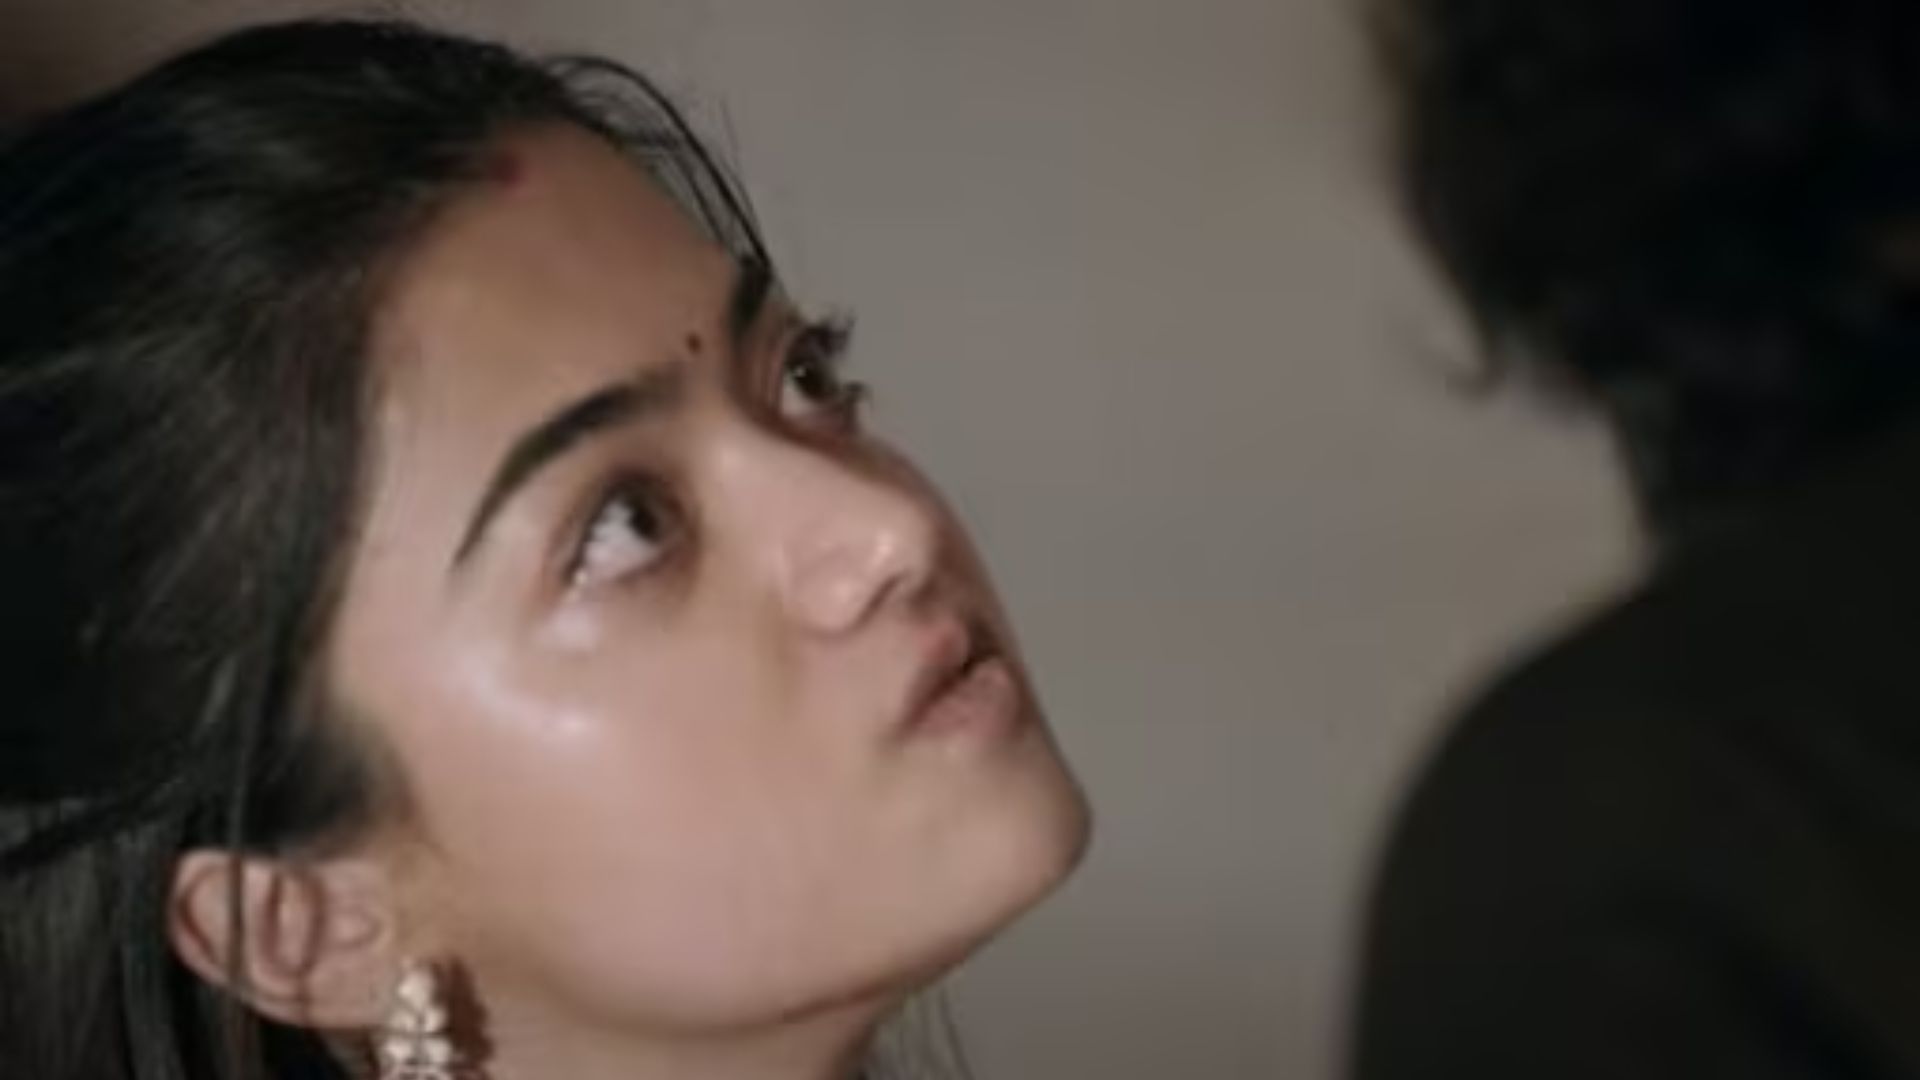 Rashmika Mandanna's 'Unclear' Dialogue Delivery in 'Animal' Has Internet Scratching its Head